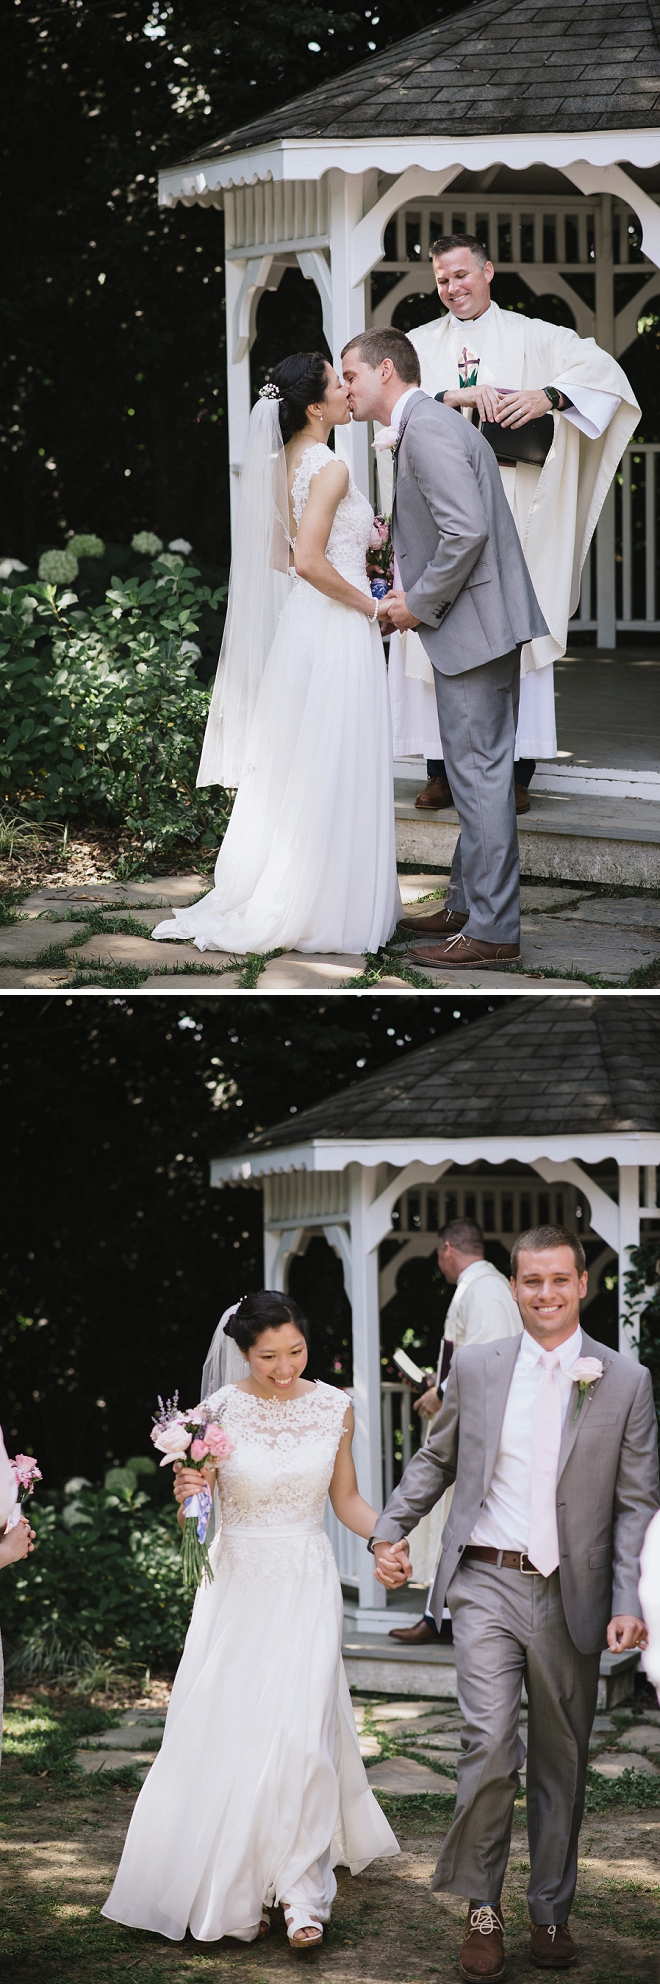 Crushing on this darling couple's first kiss and Mr. and Mrs!